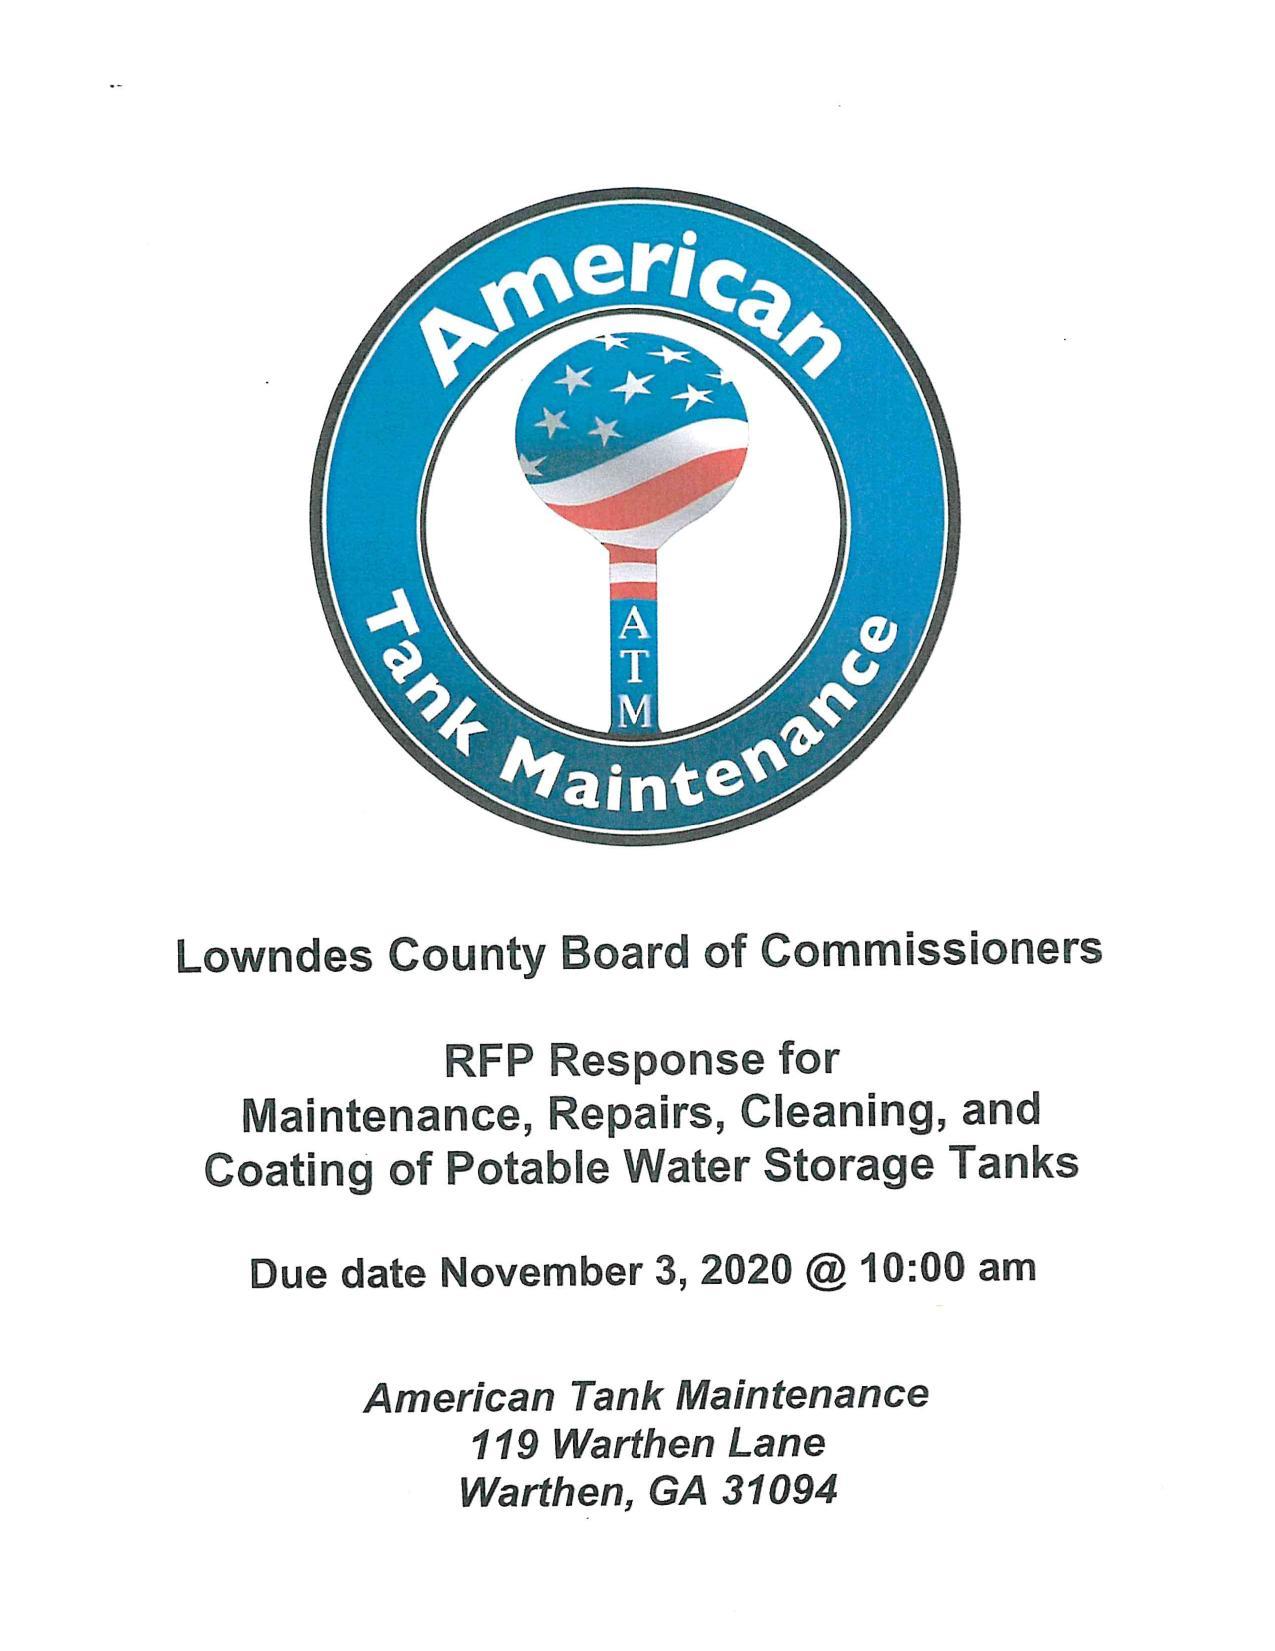 seven year contract for maintenance, repairs, cleaning, and coating of Lowndes County's potable water tanks.